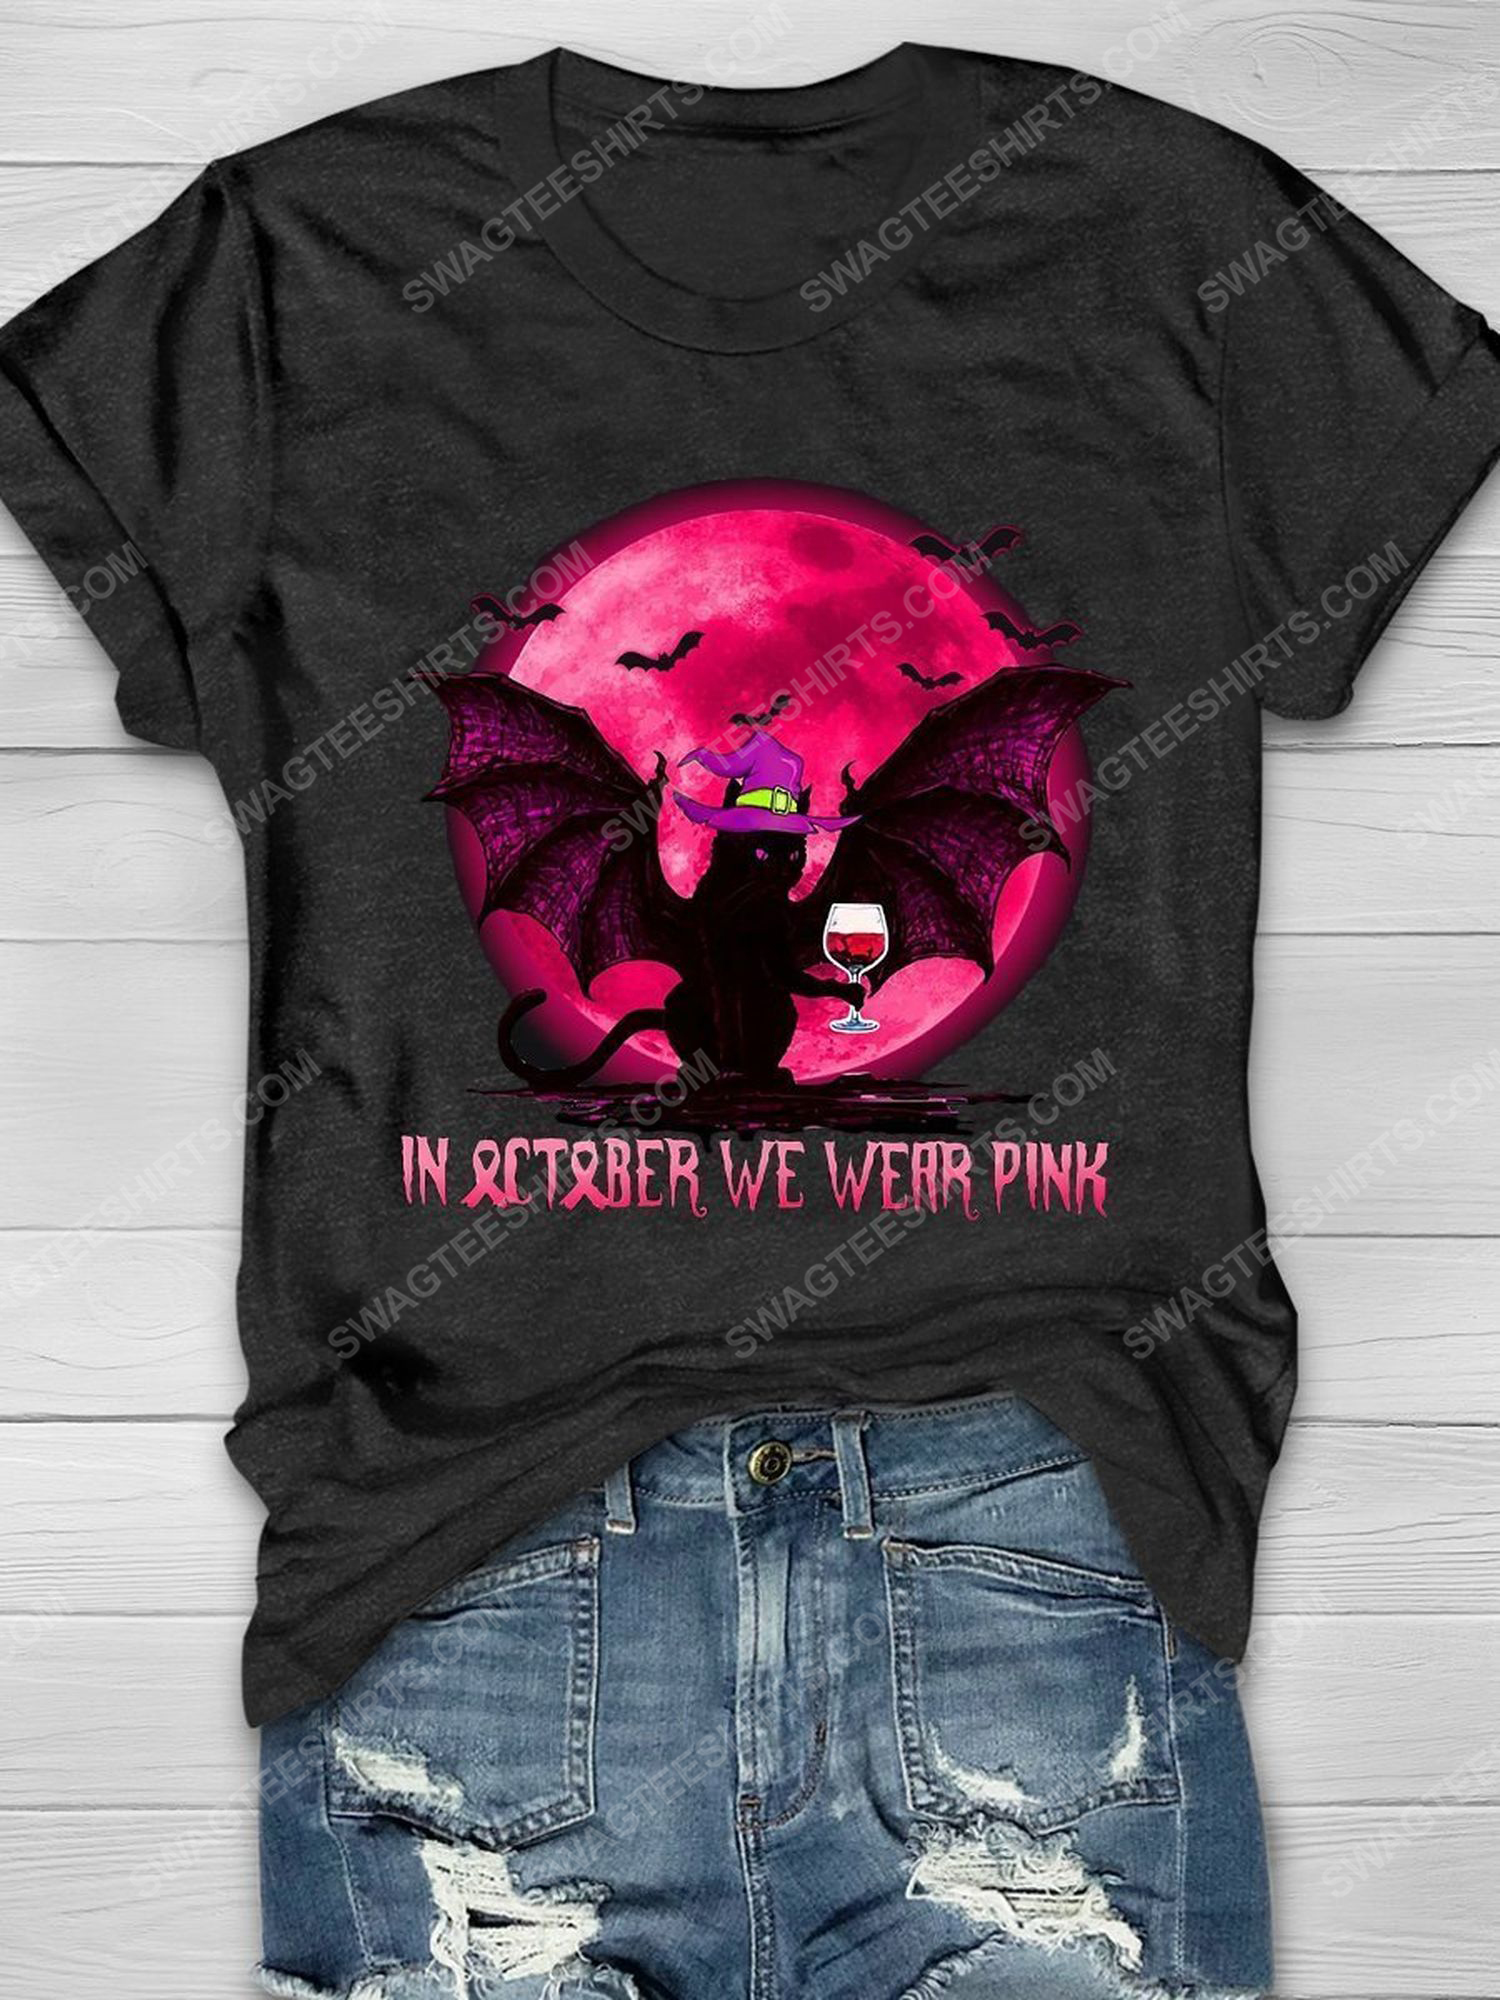 Breast cancer in october we wear pink cat and wine shirt 1